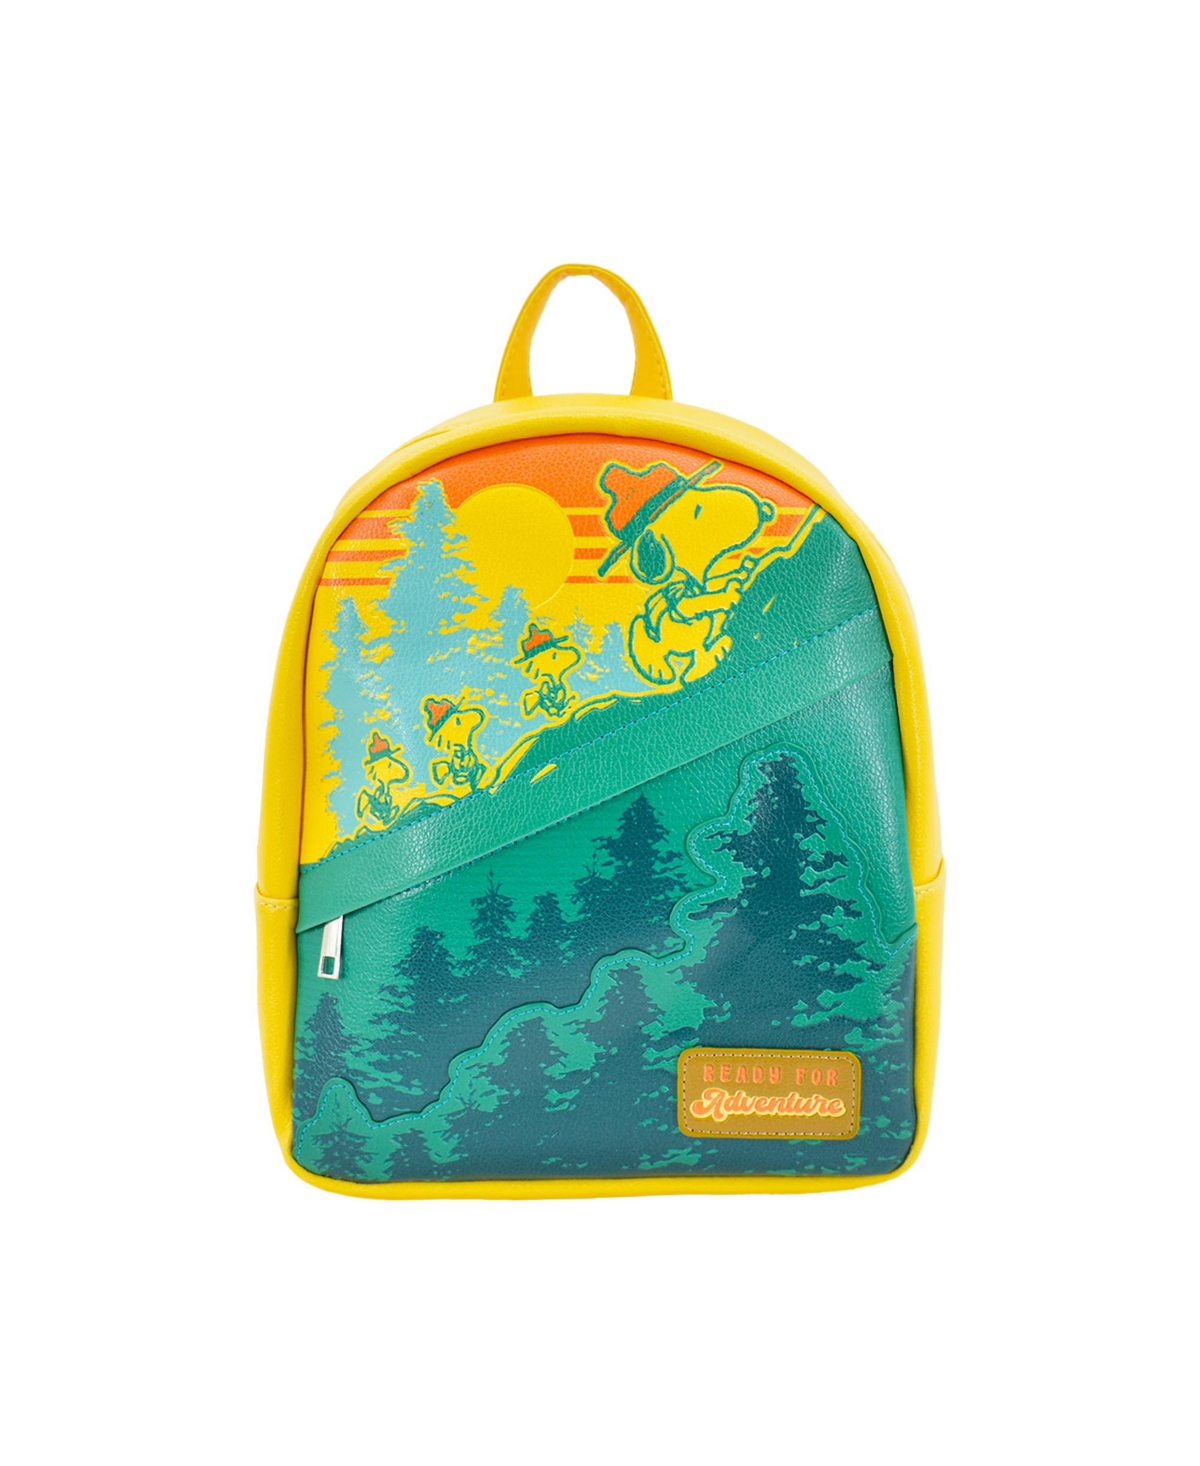 Ready for Adventure Mini Backpack - Bright Yellow